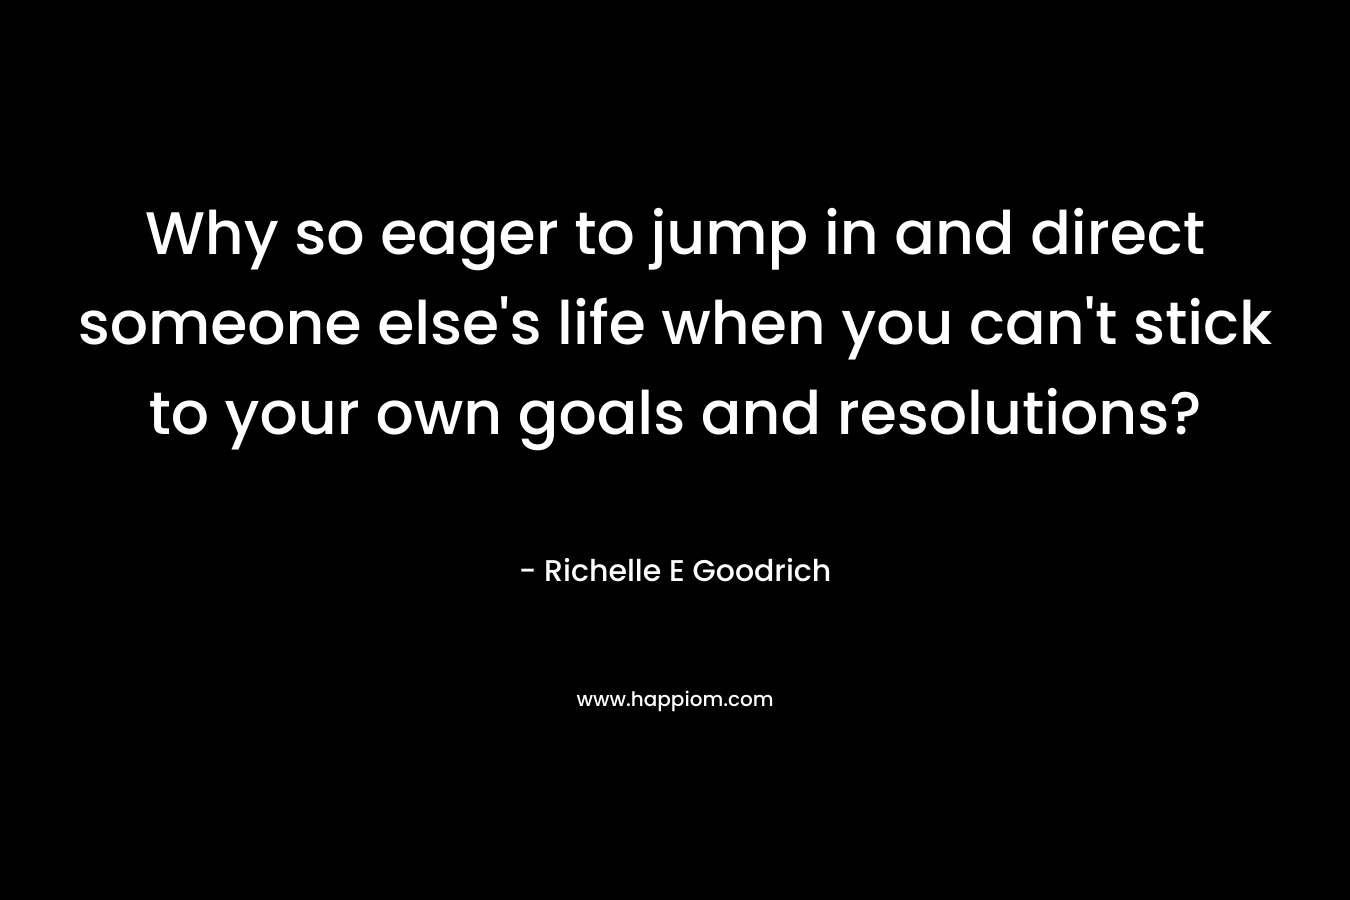 Why so eager to jump in and direct someone else’s life when you can’t stick to your own goals and resolutions? – Richelle E Goodrich